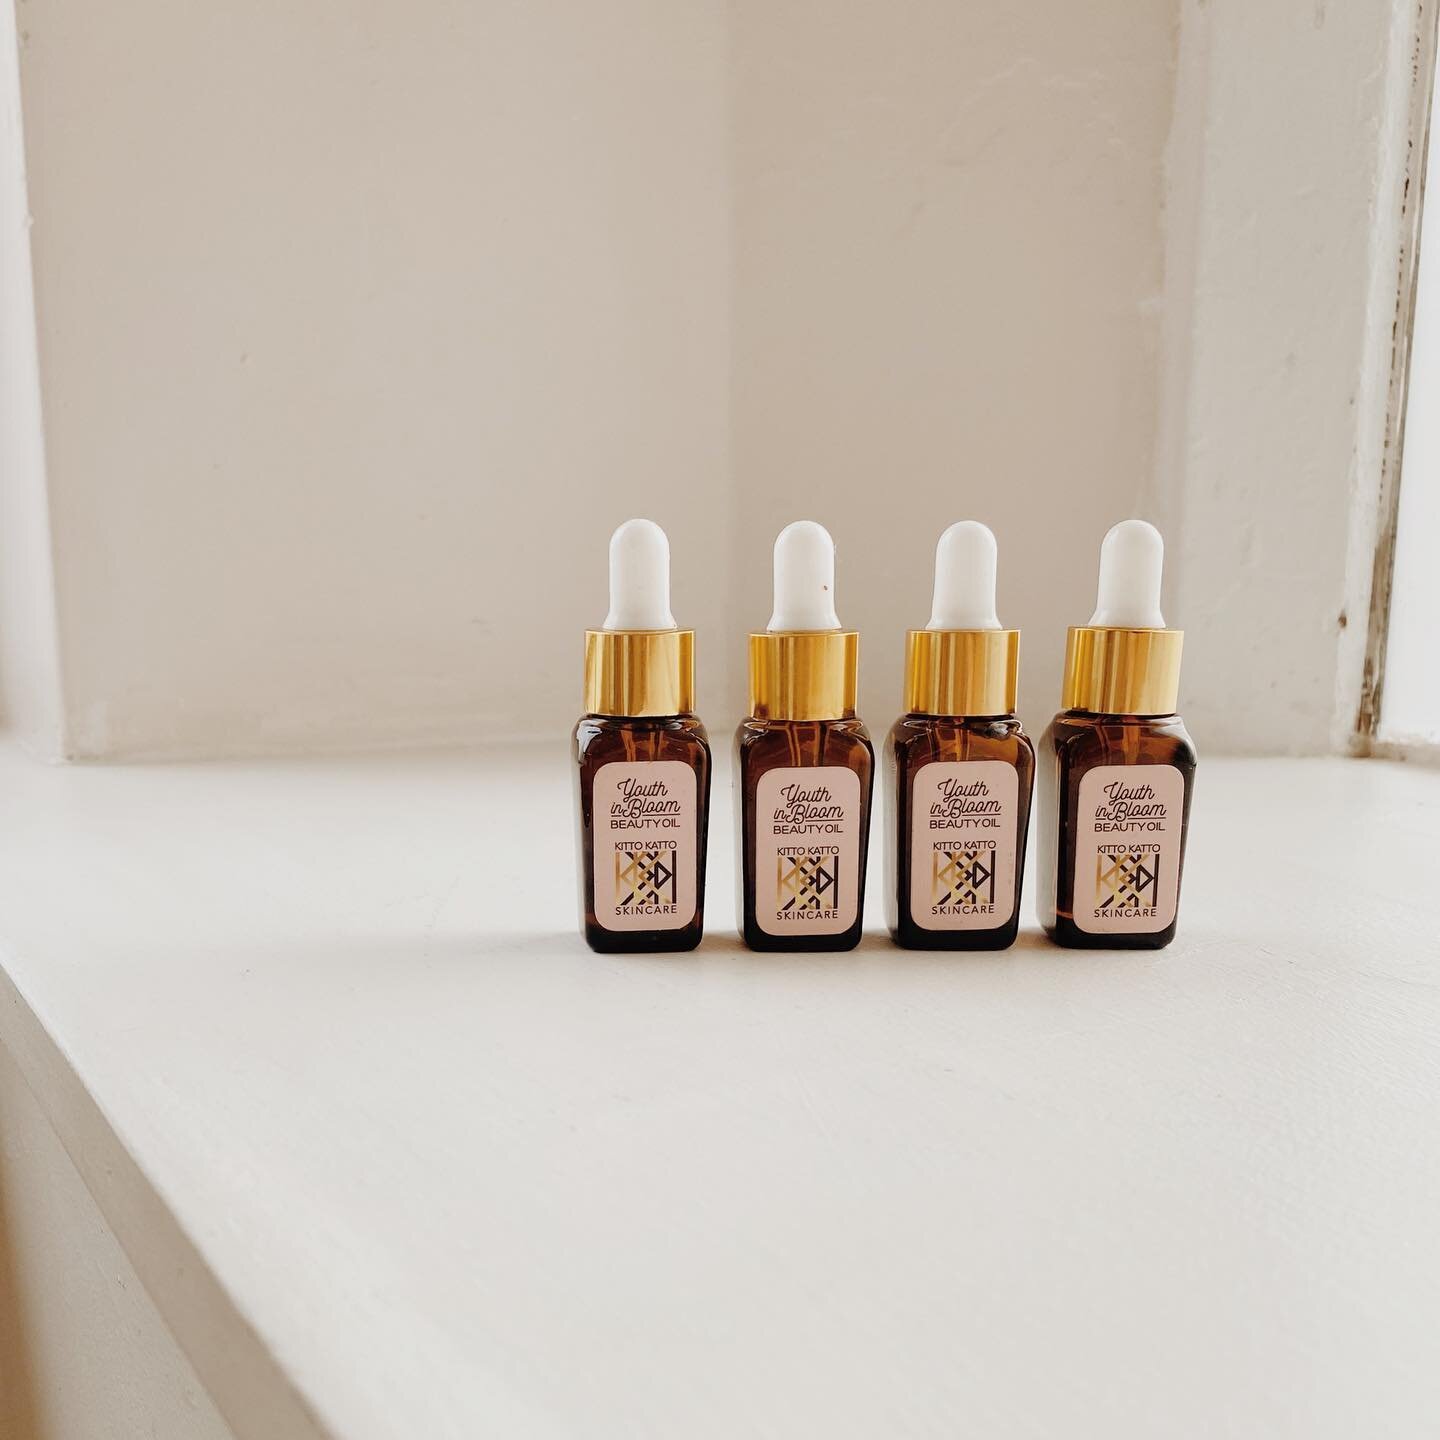 Youth In Bloom Beauty Oil // Client (and my) absolute favourite elixir. This luxurious beauty oil is intended for those with normal, dry, and combination skin. Though our bodies produce oil, natural oil decreases with age. During winter, unbalanced s